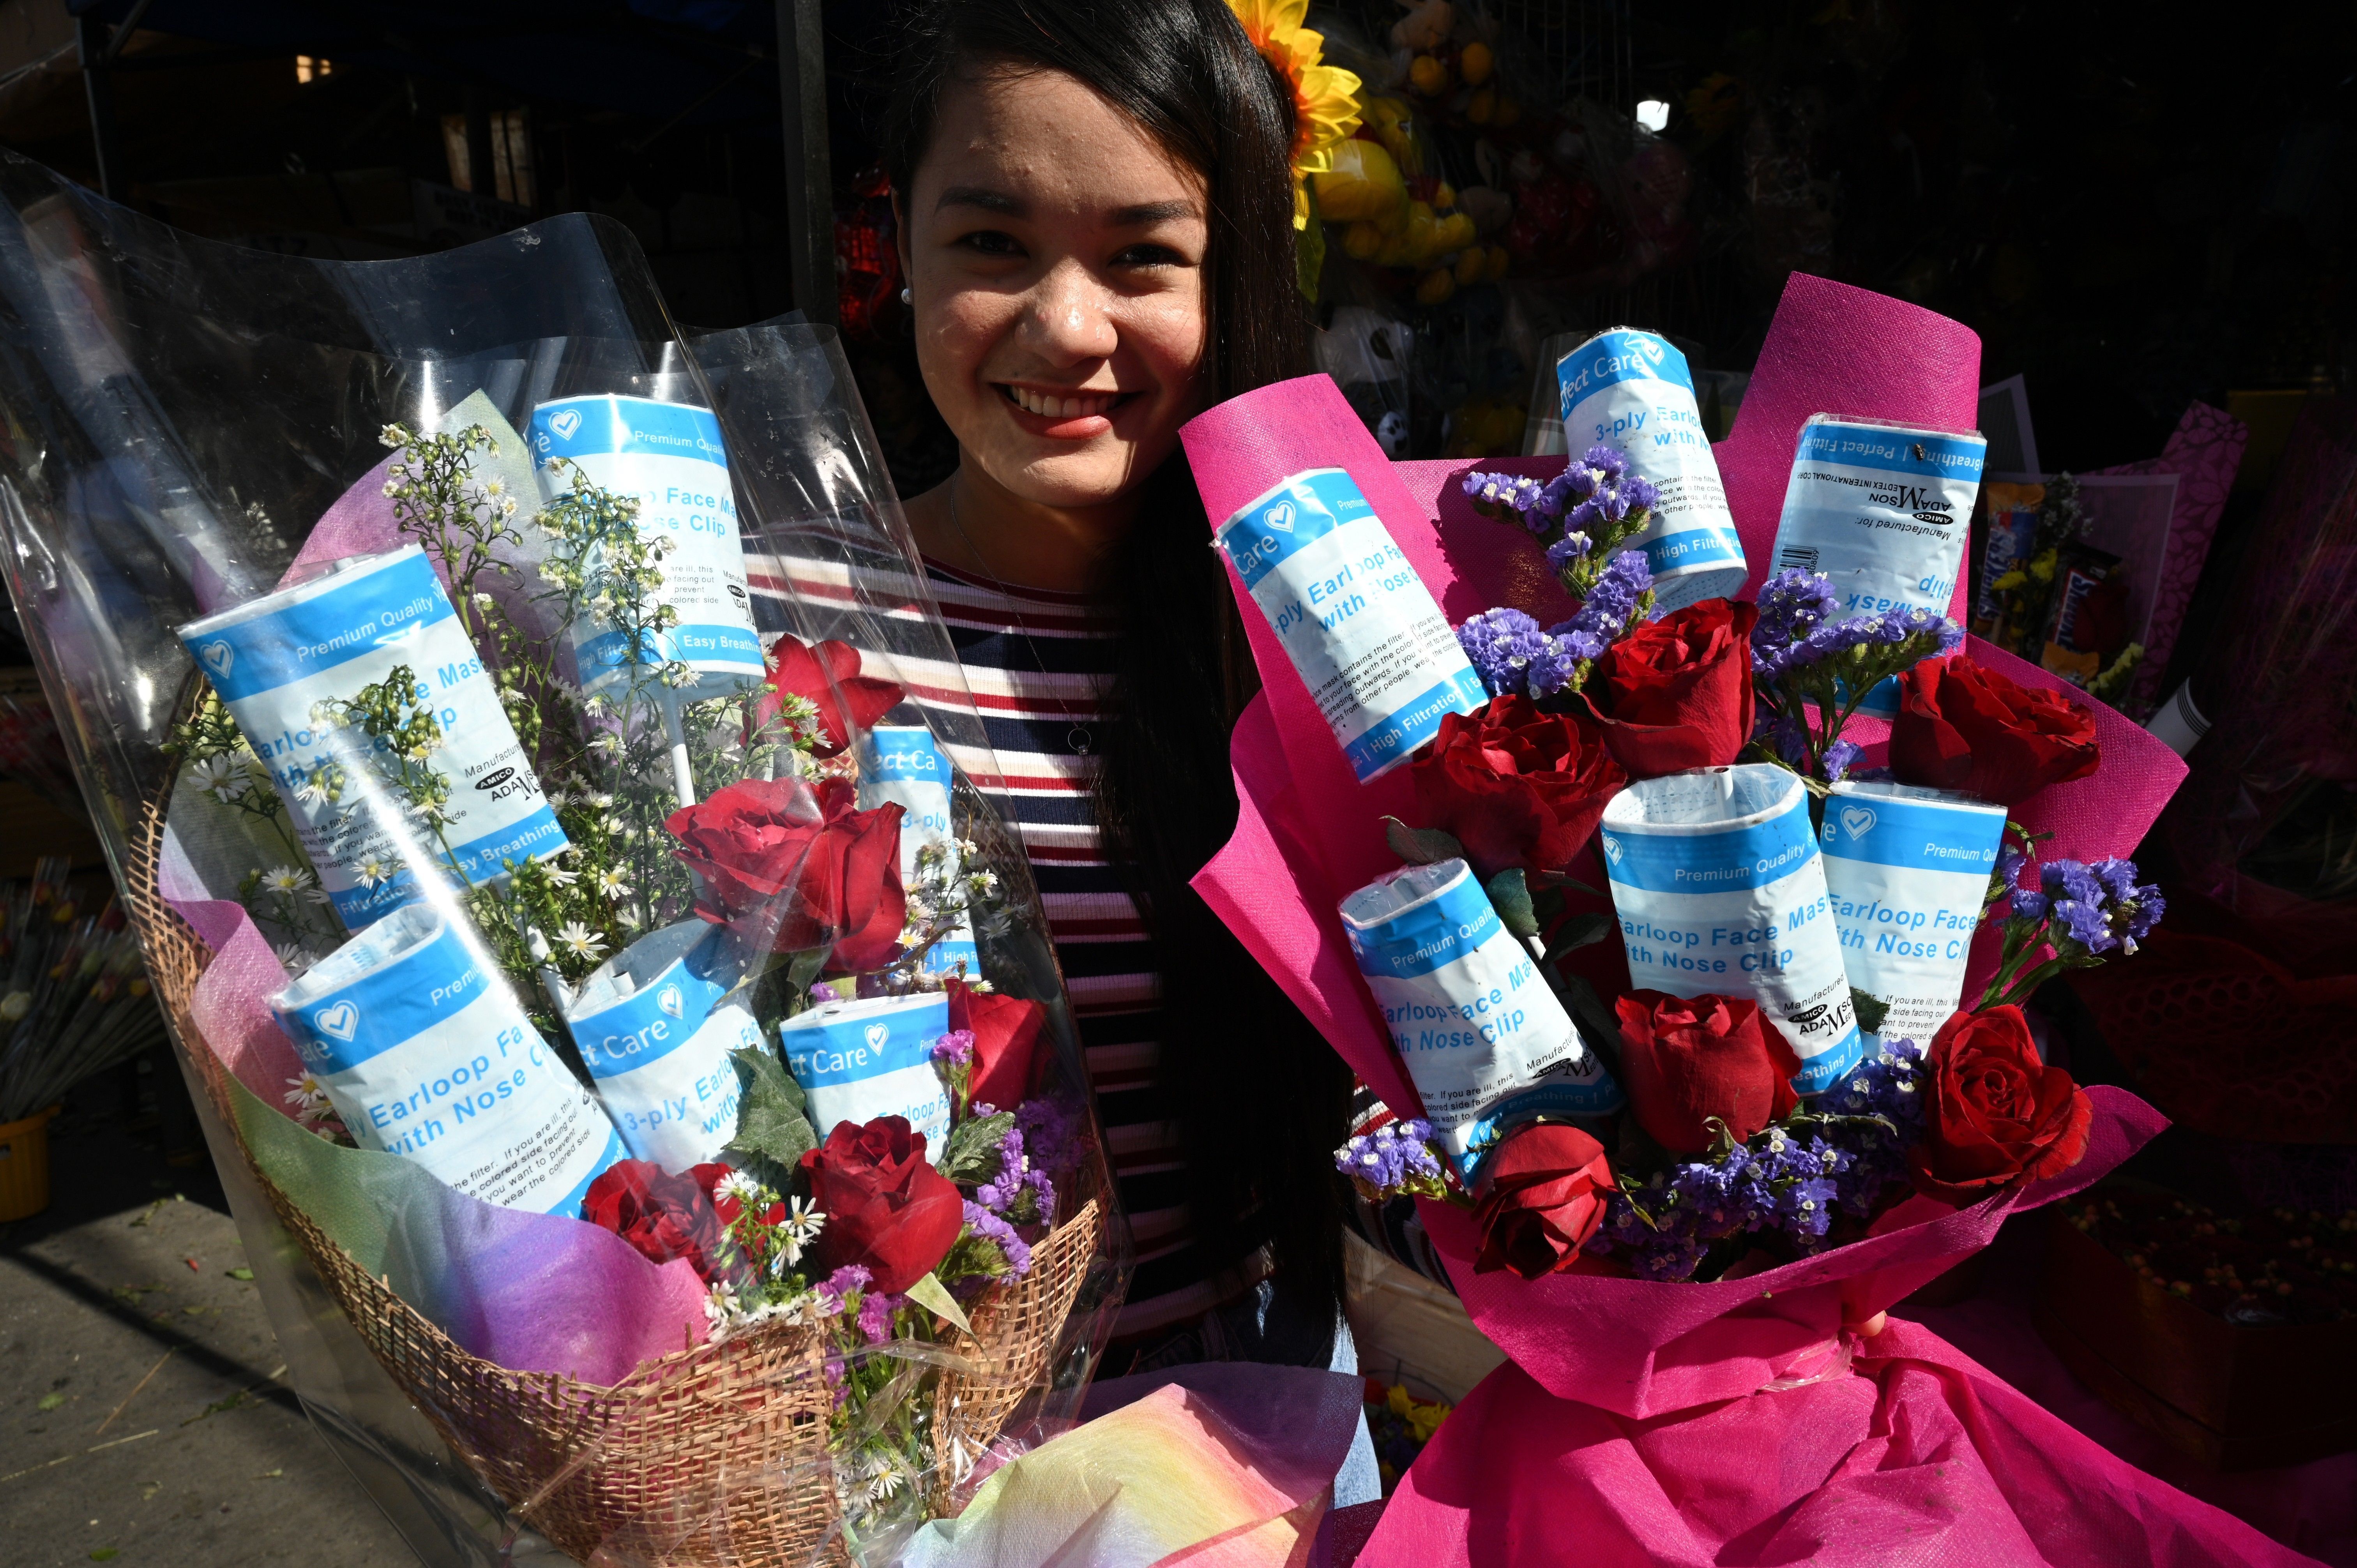 In this image, a woman holds two bouquets of flowers and face masks. She is not wearing one